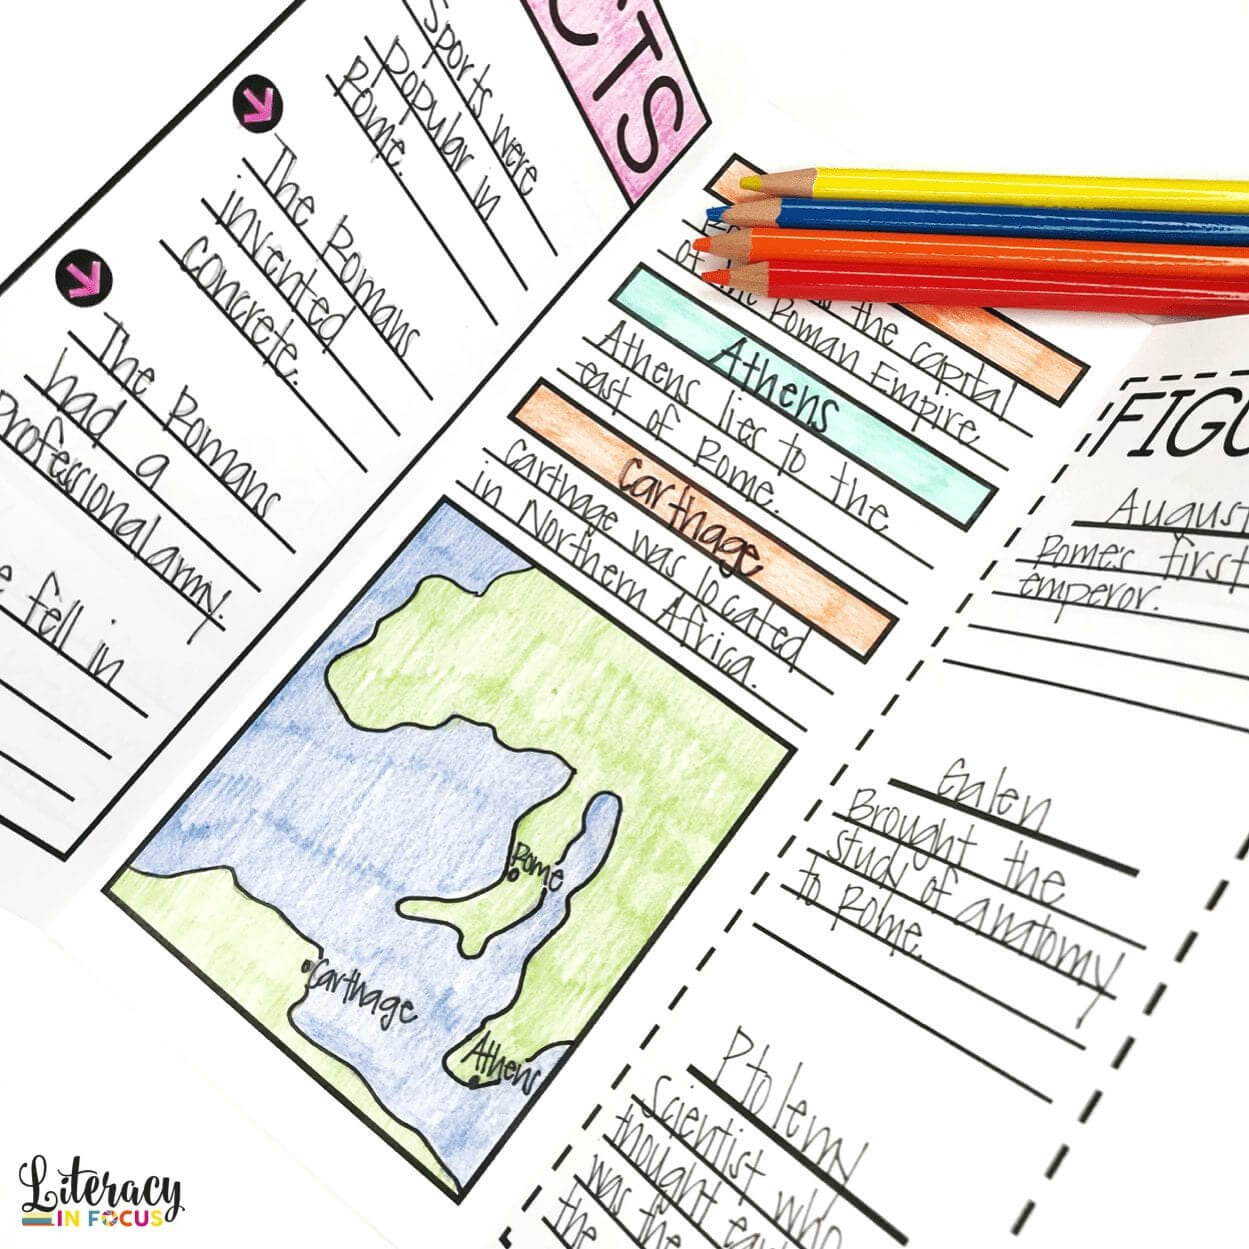 Historical Travel Brochure And Research Project | Literacy For Brochure Rubric Template